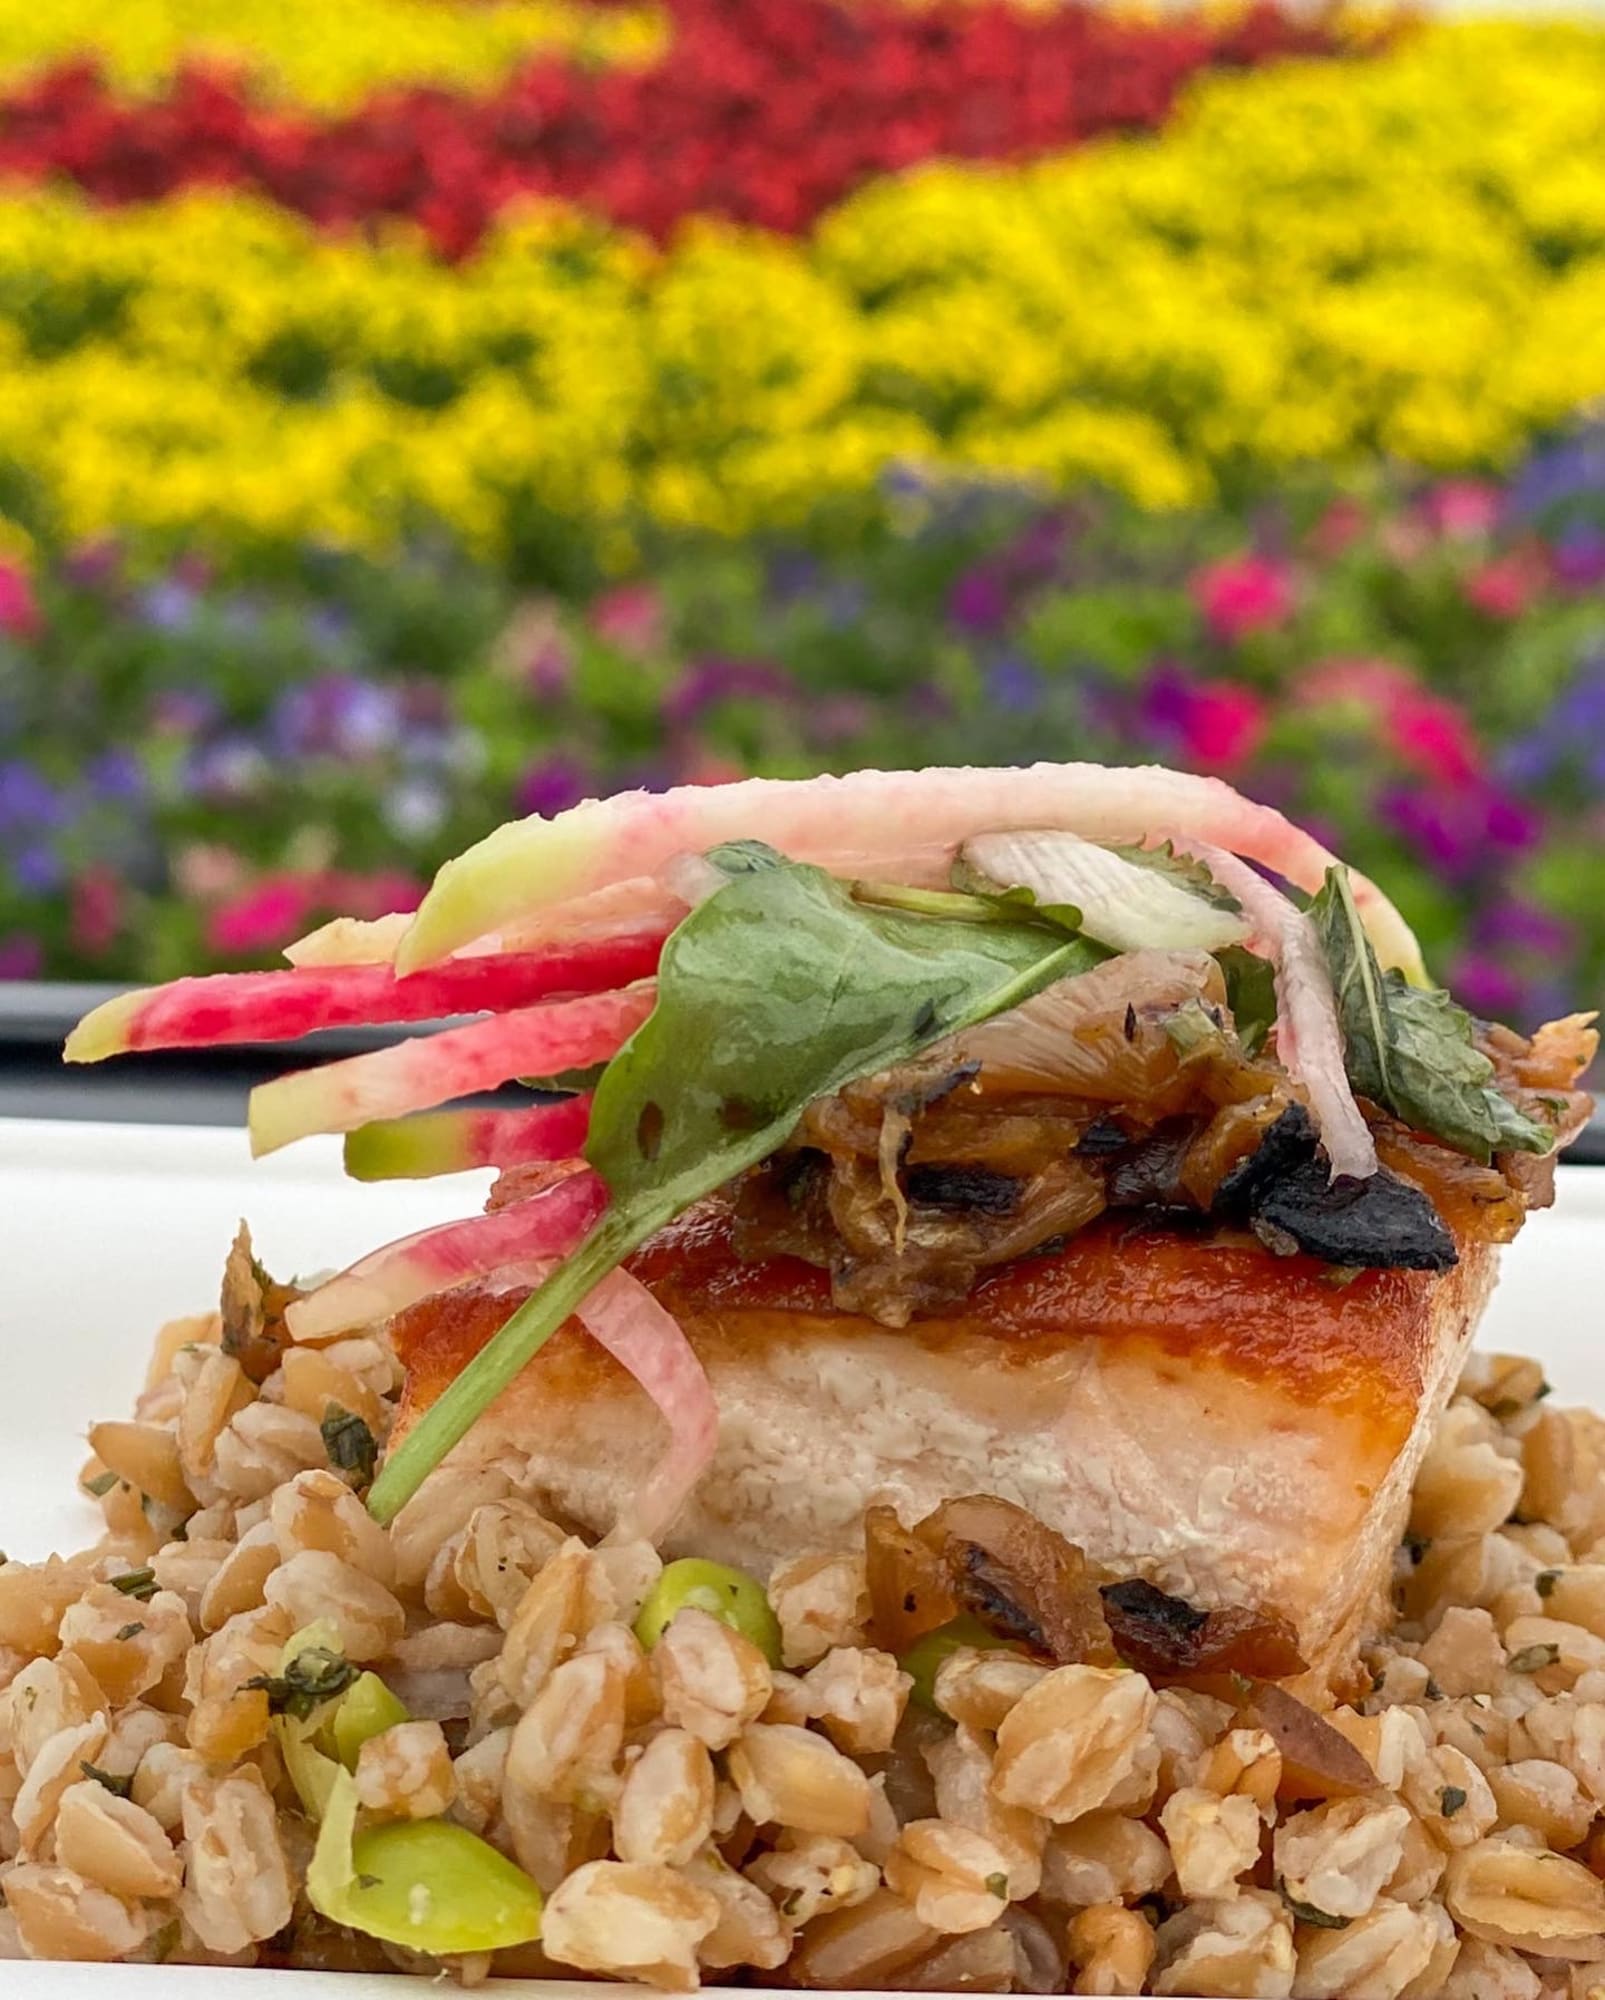 5 Epcot Flower and Garden Festival 2022 dishes that cannot be missed